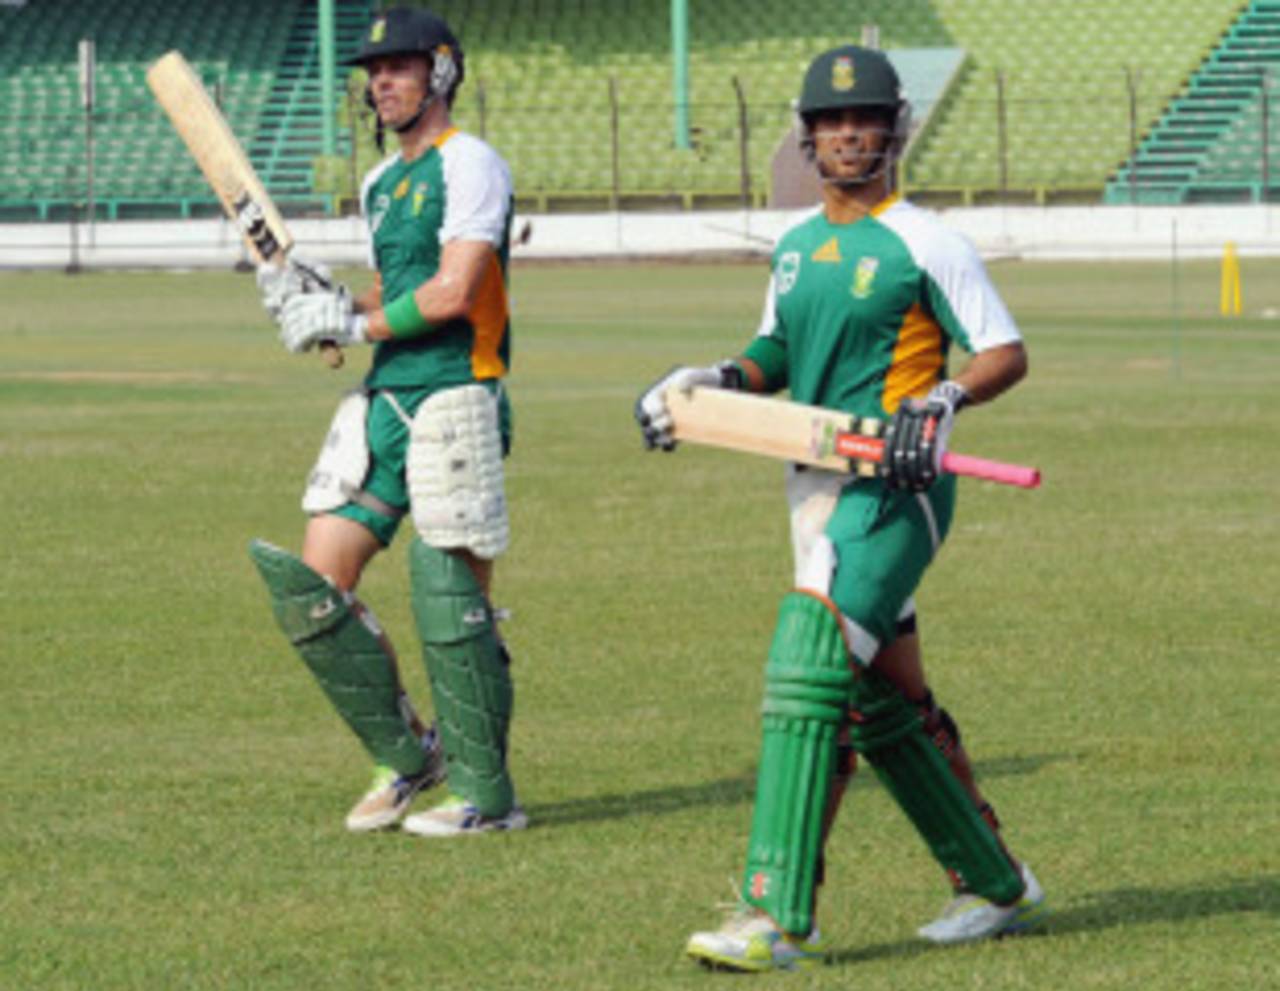 Johan Botha and JP Duminy prepare to have a bat in the nets, Dhaka, March 23, 2011